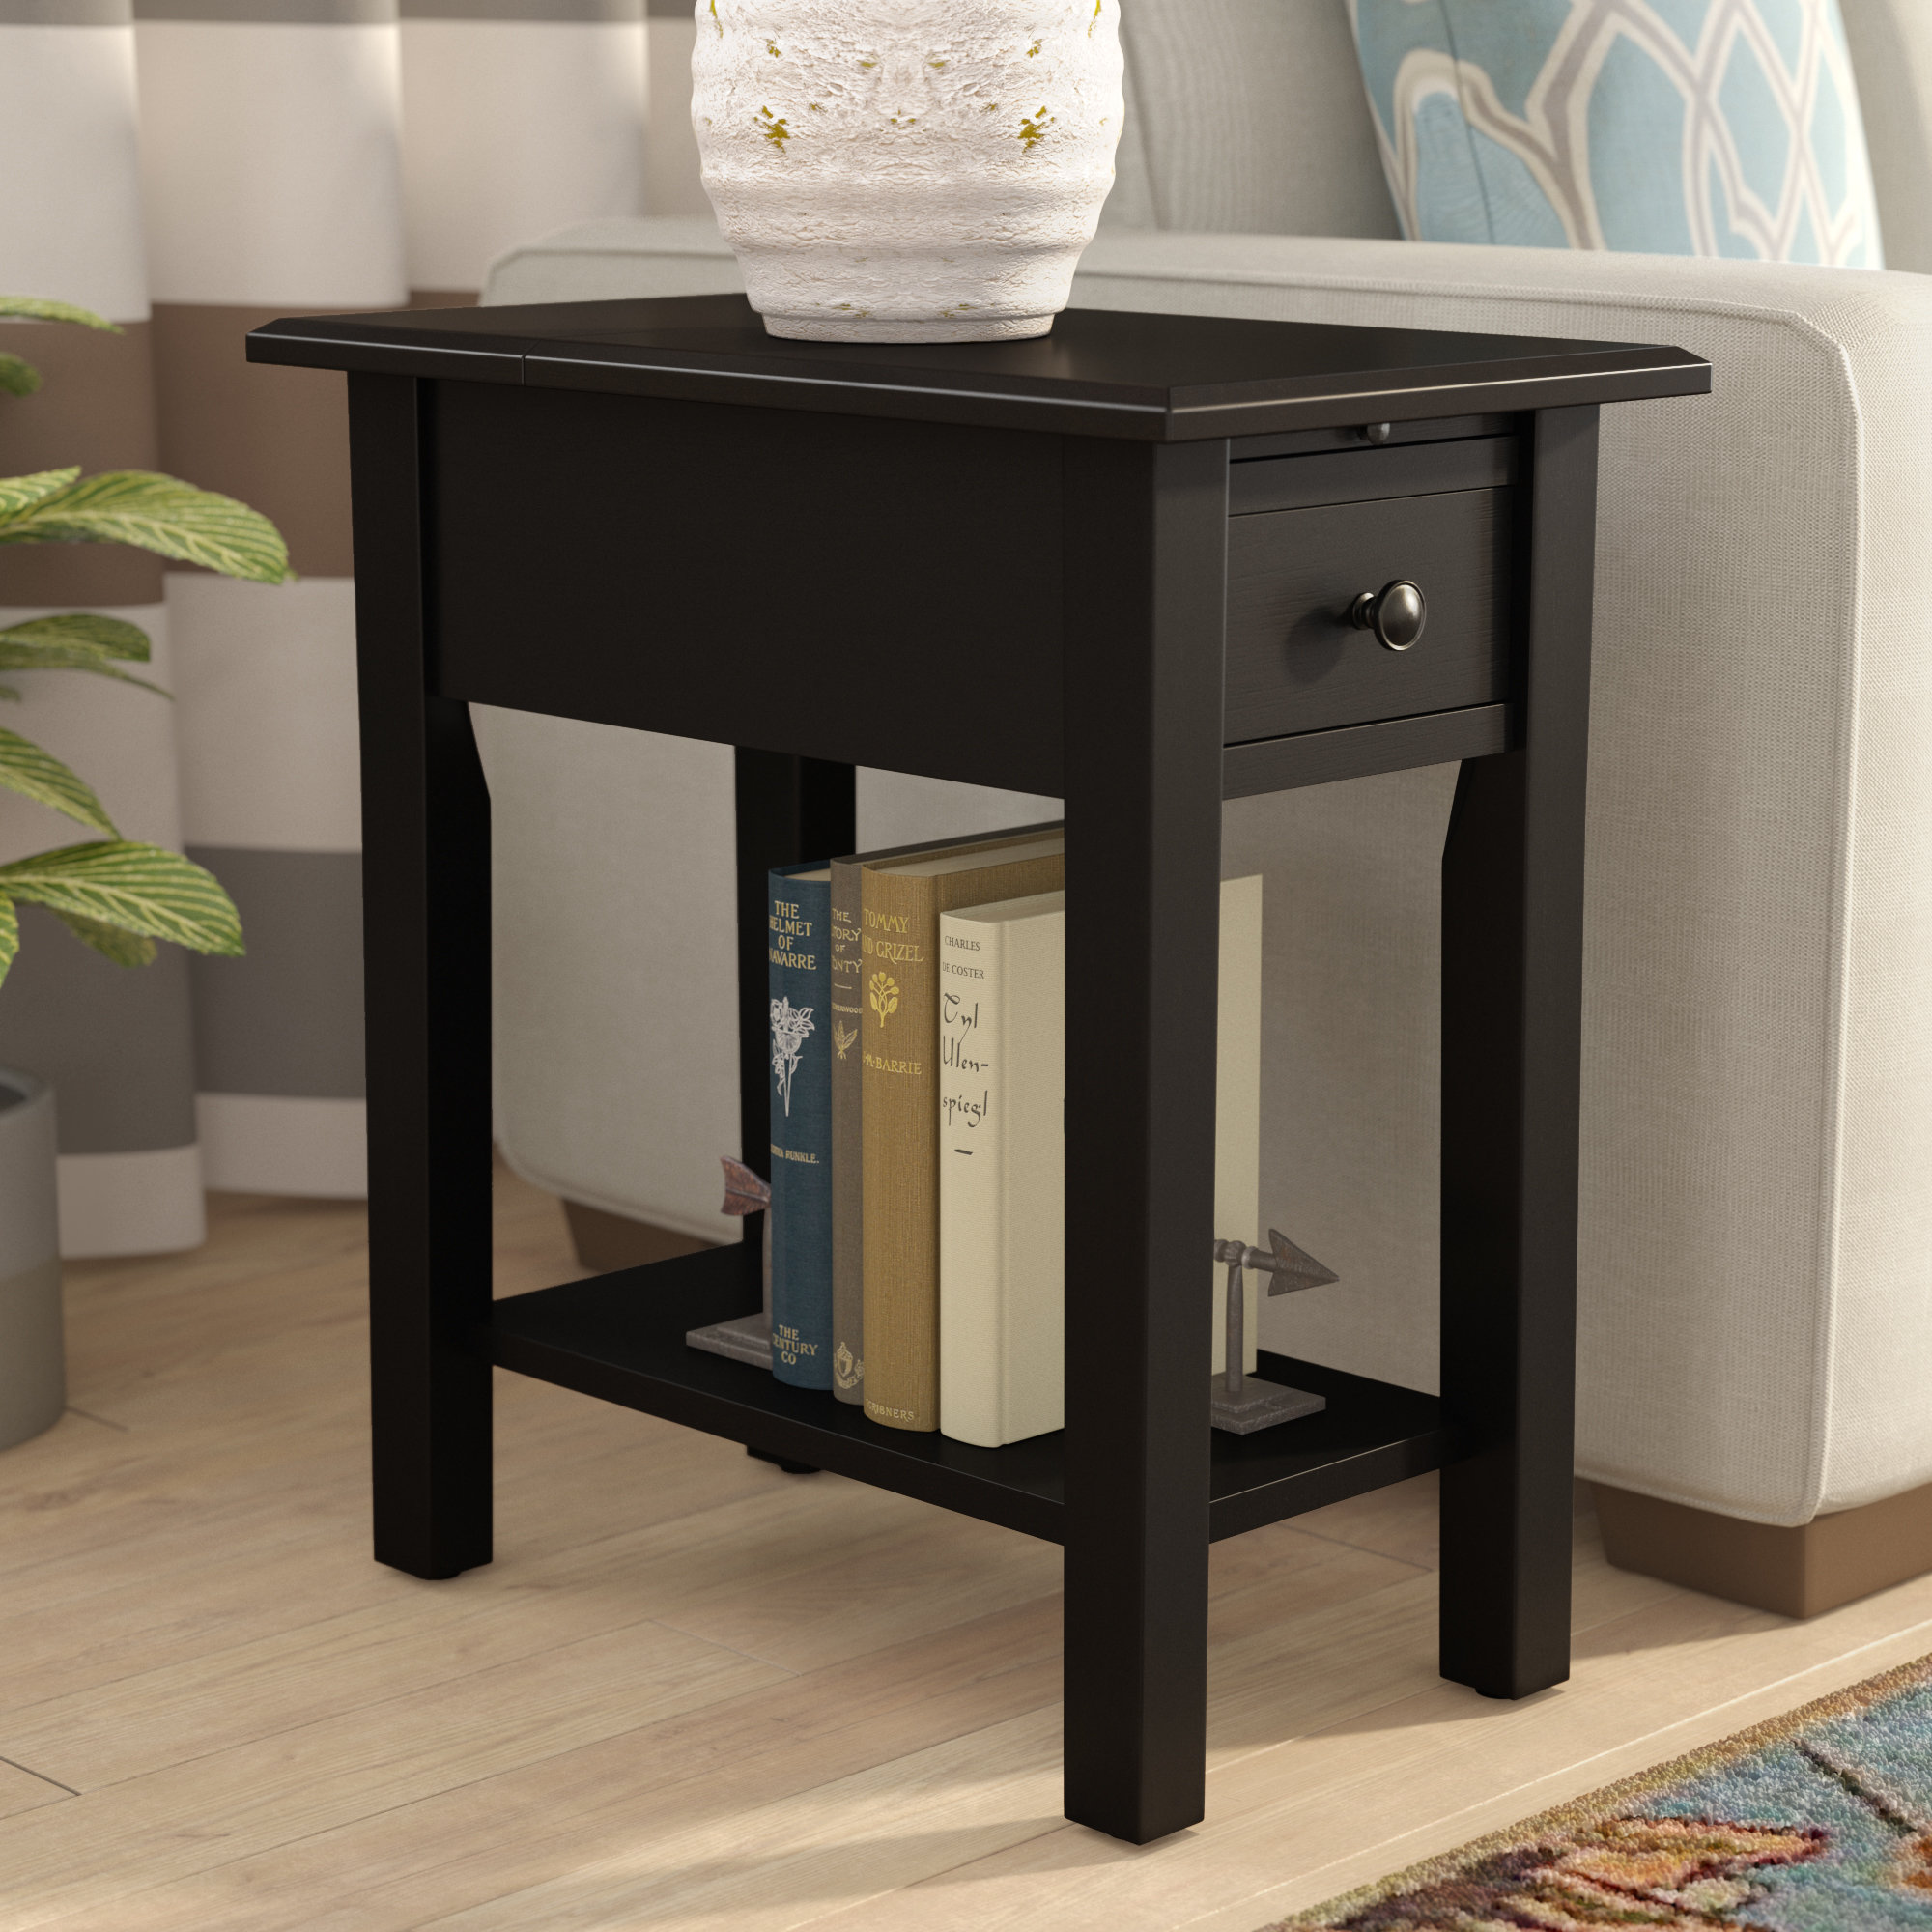 andover mills lundgren end table with storage reviews accent usb retro side narrow cabinet affordable bedside tables black console drawers wood frame mirror plans living room